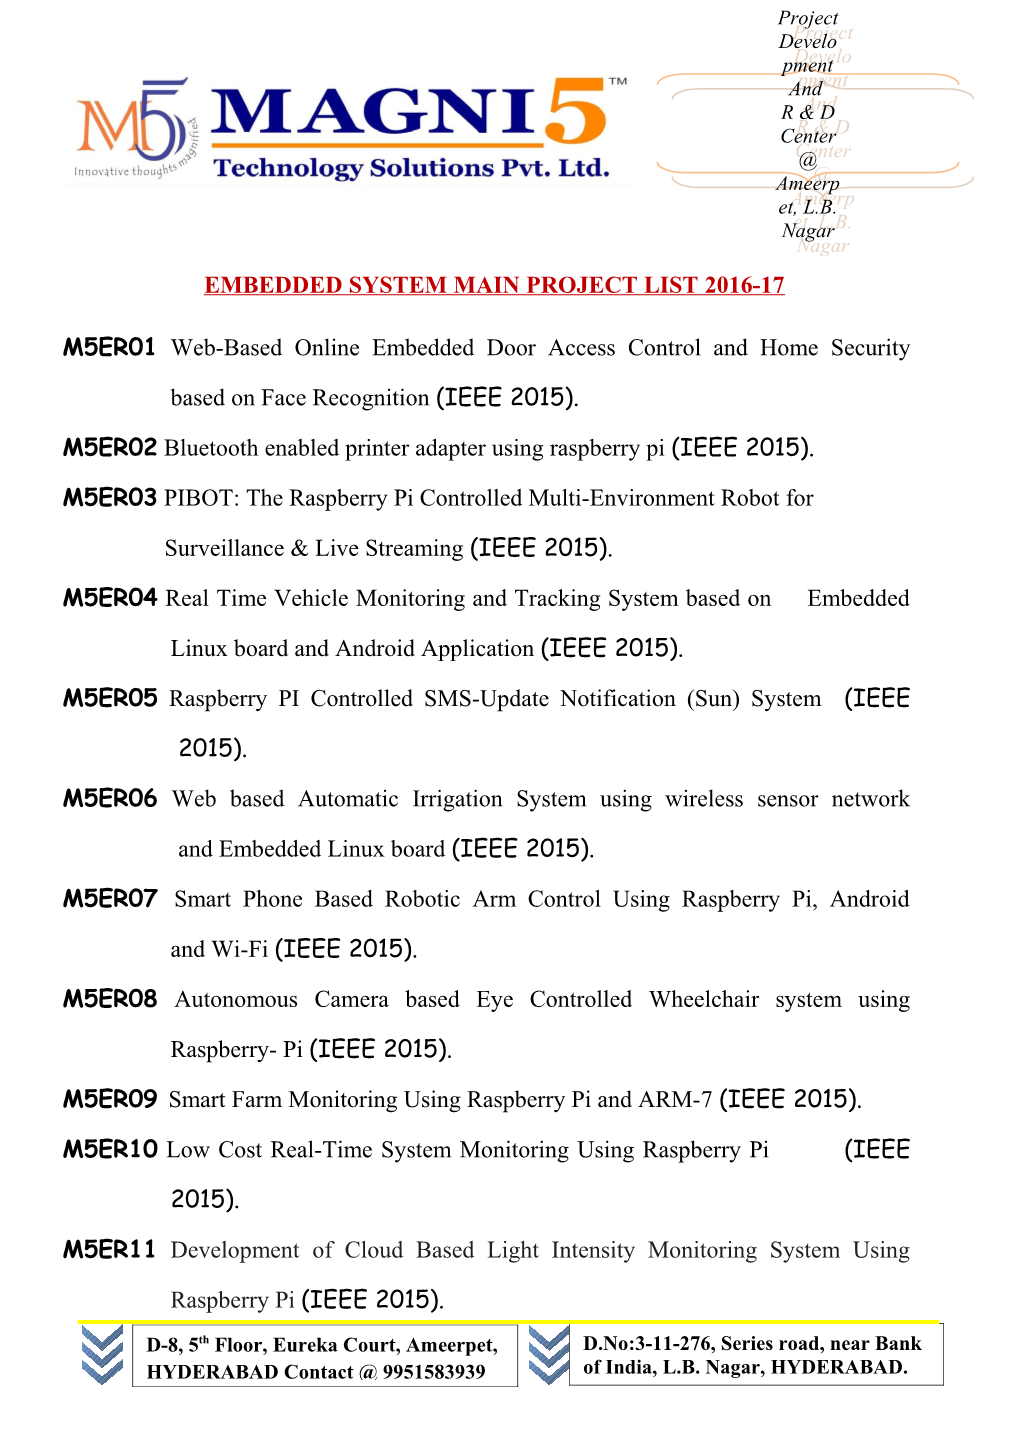 Embedded System Main Project List 2016-17